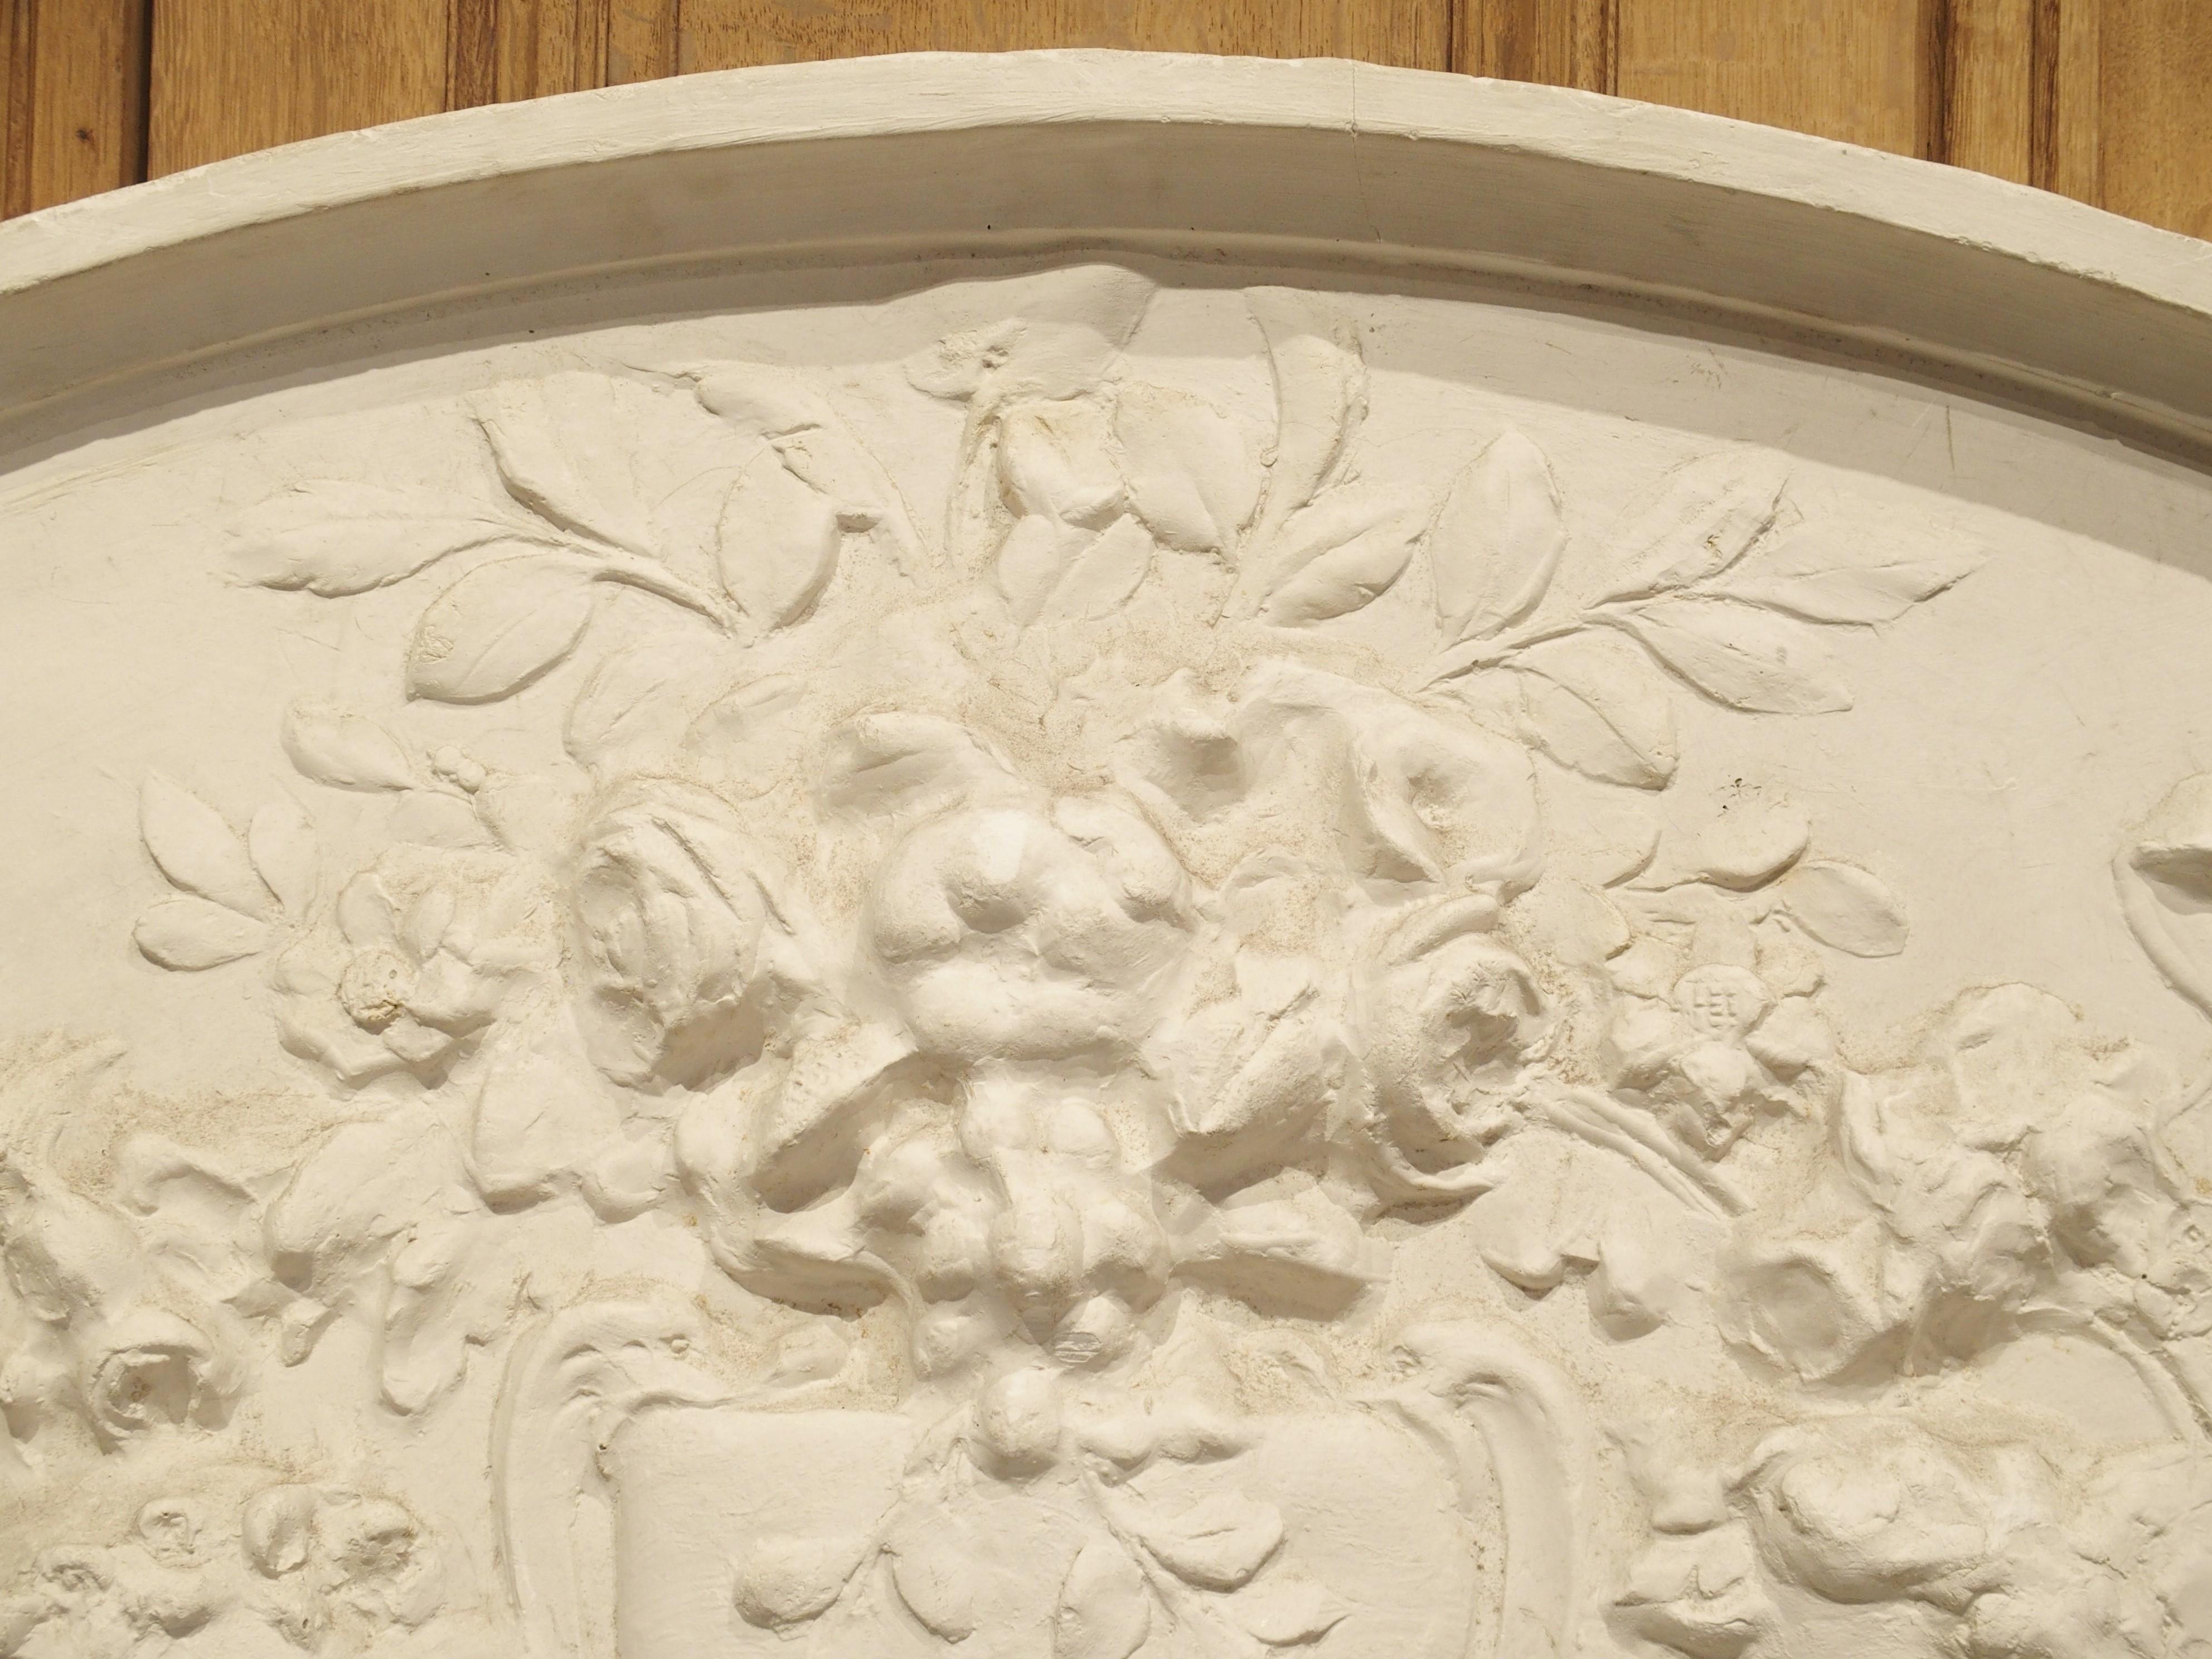 Produced in France, this large arched plaster overdoor has been sculpted in bas-relief, or low relief. In bas-relief, a sculptural image is raised to a shallow depth above the background. If viewed from the side, the sculpture has no meaning, as